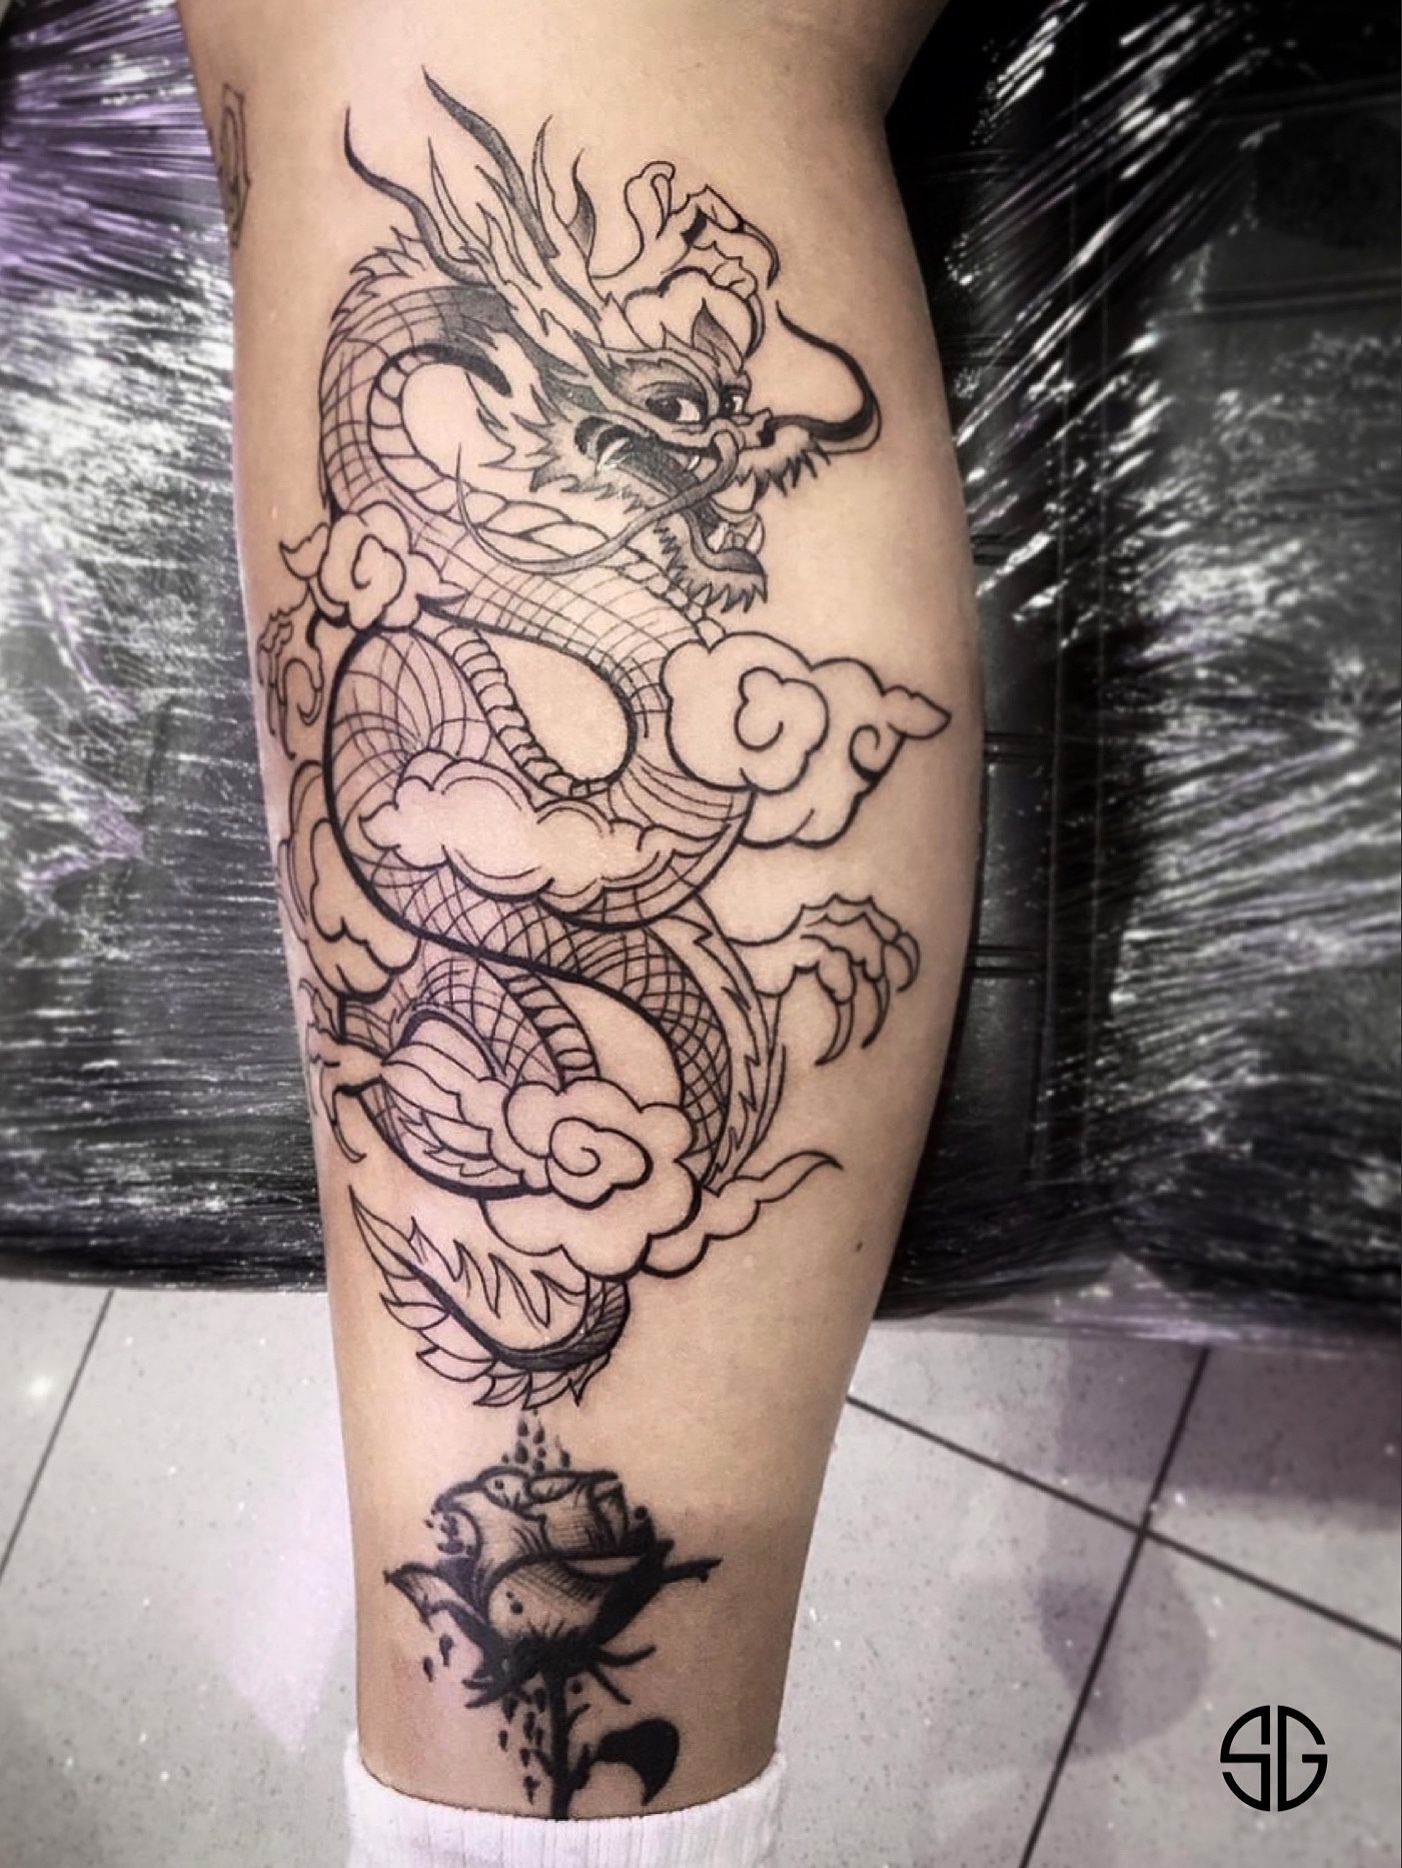 Tattoo tagged with small chang line art dragon tiny ifttt little  red upper back experimental medium size mythology other fine line   inkedappcom